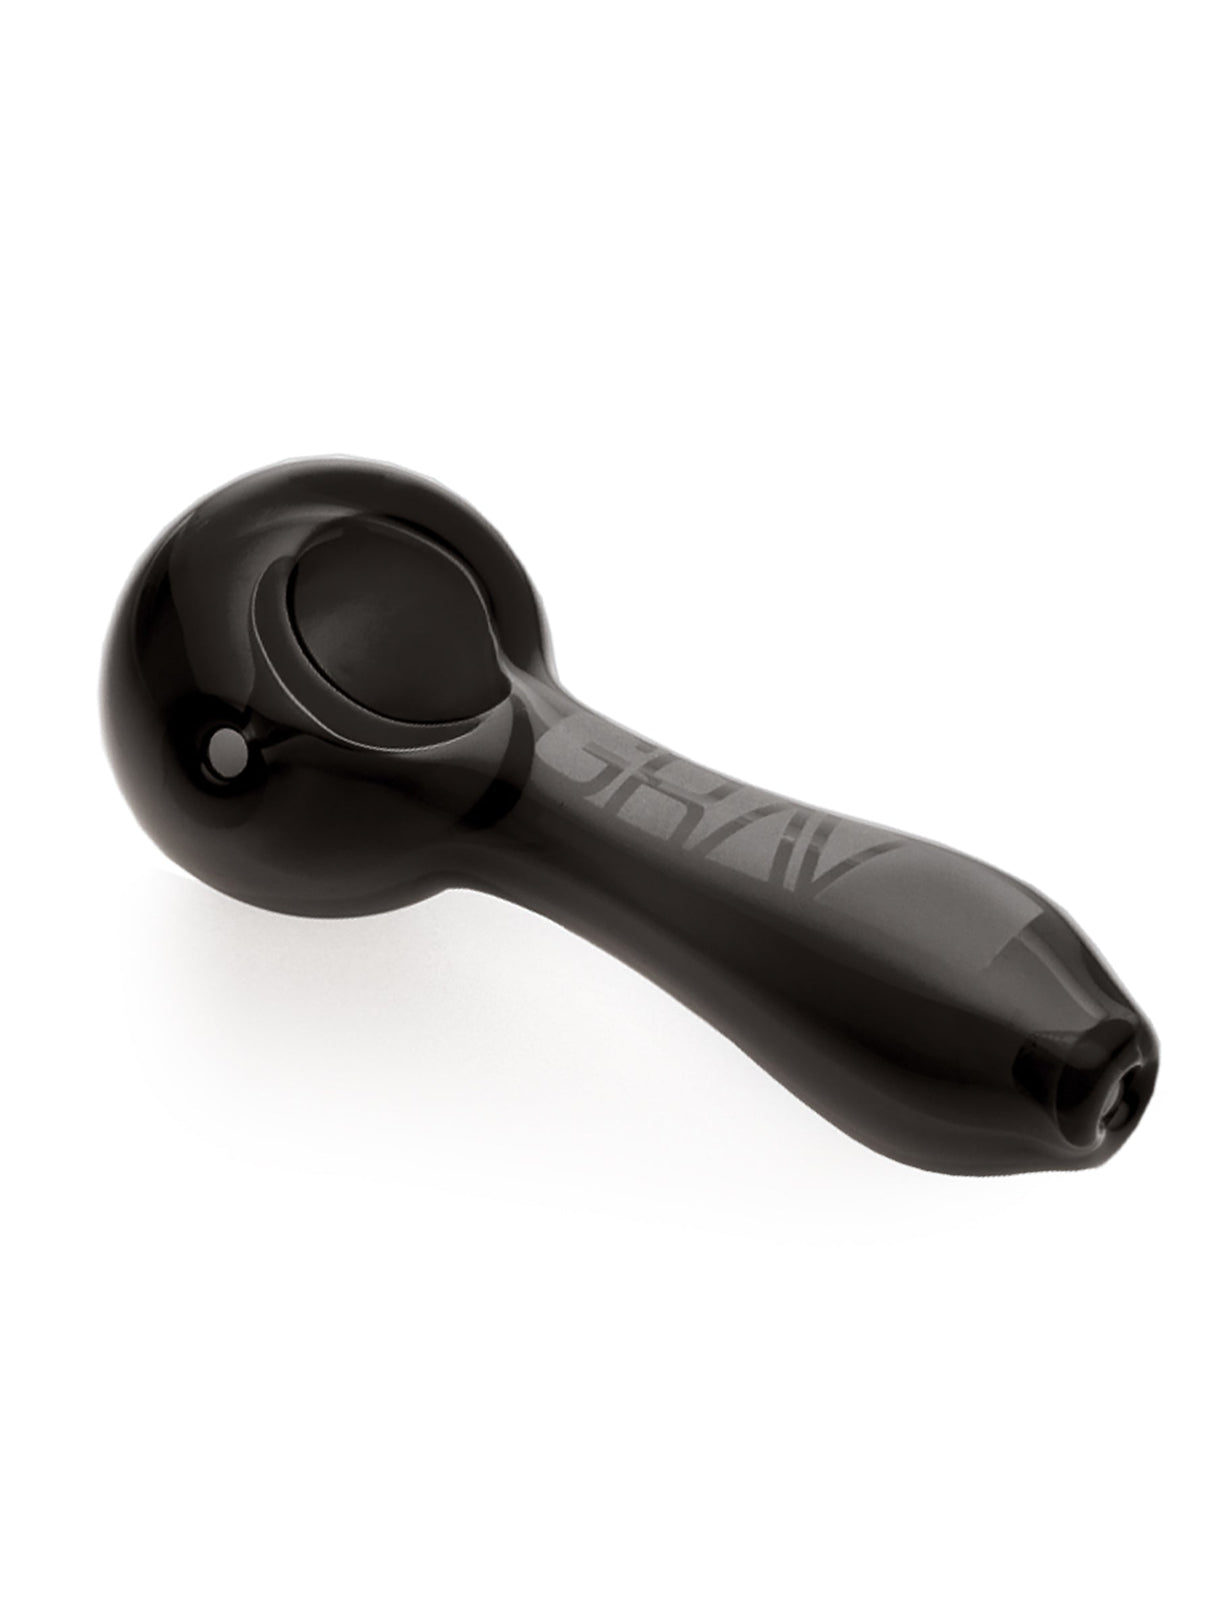 GRAV Classic Spoon in Black - Compact 4" Borosilicate Glass Hand Pipe with Deep Bowl